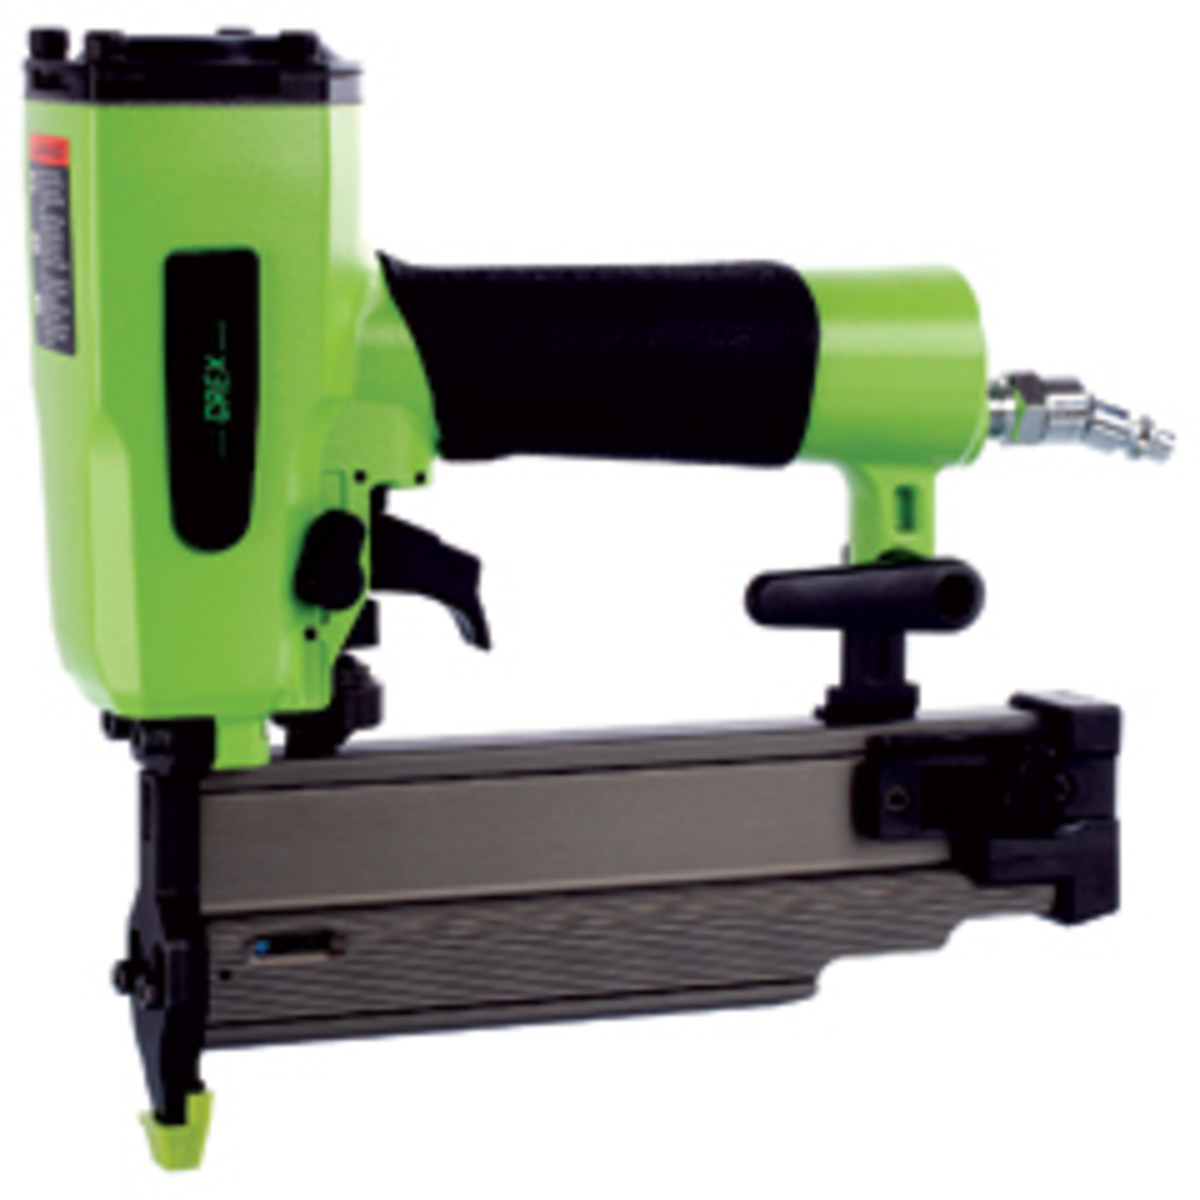 The Grex 18-gauge 2" brad nailer, also known as the "Green Buddy."